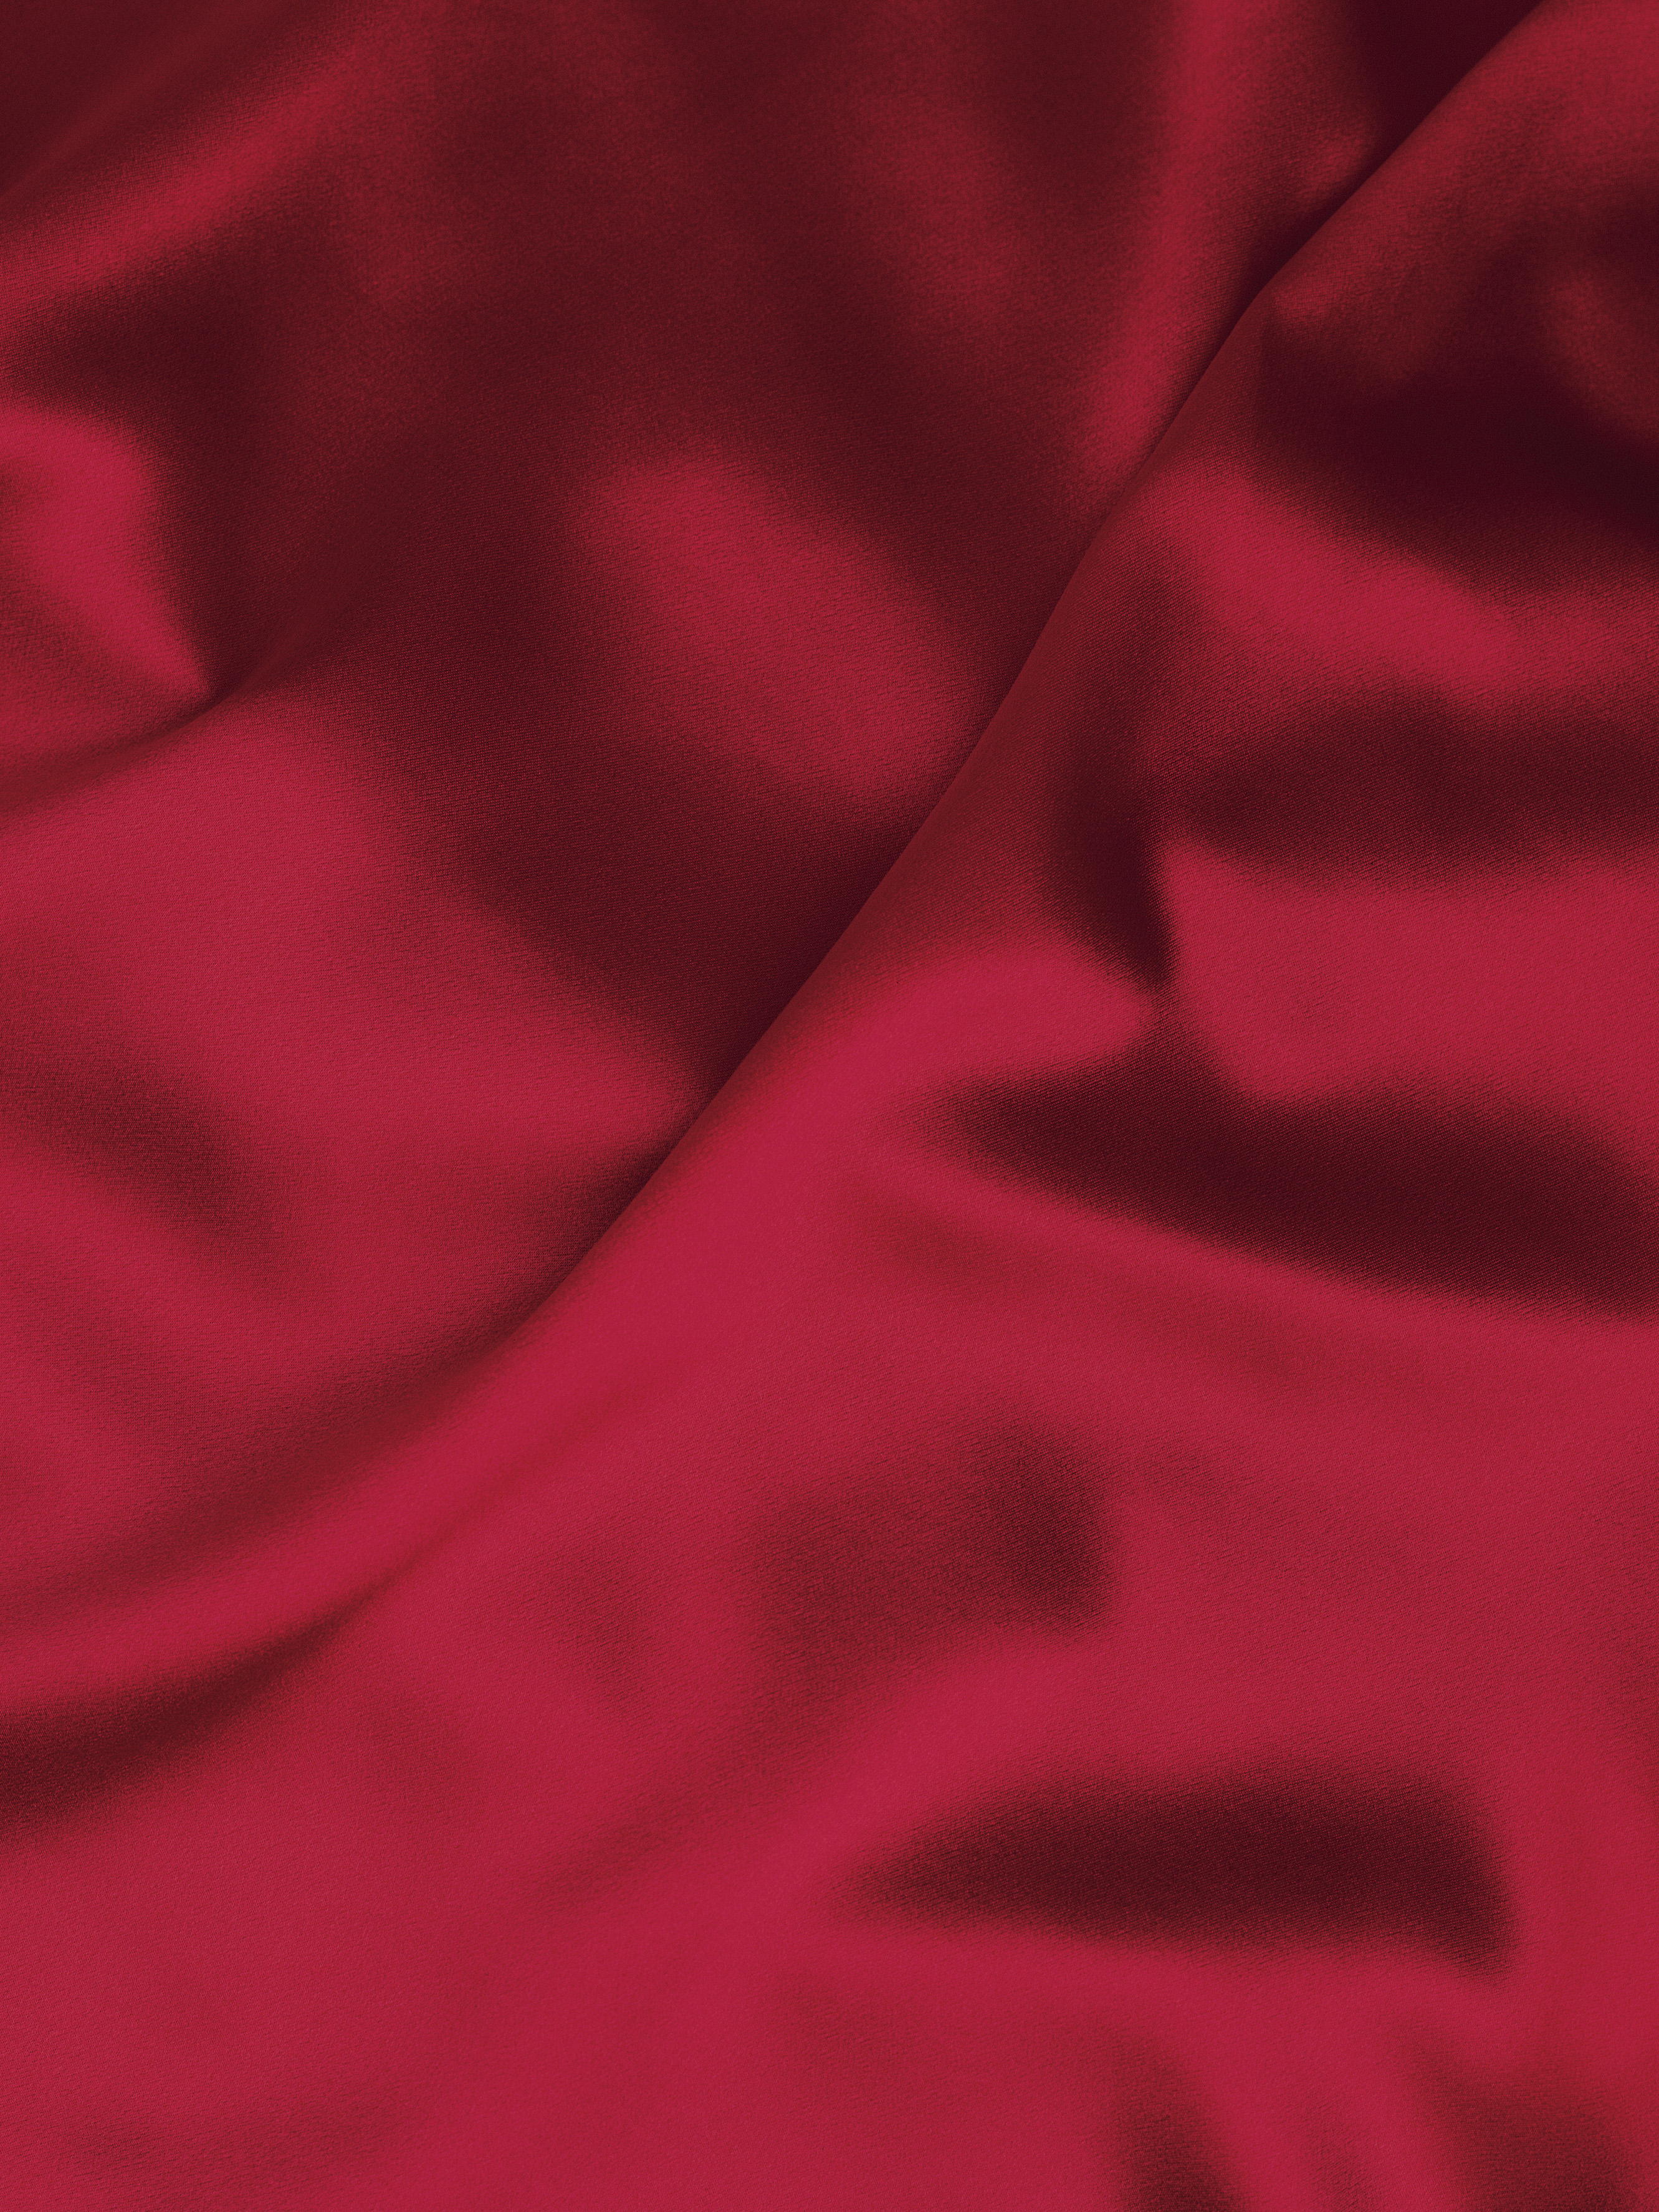 What Is Silk Satin?